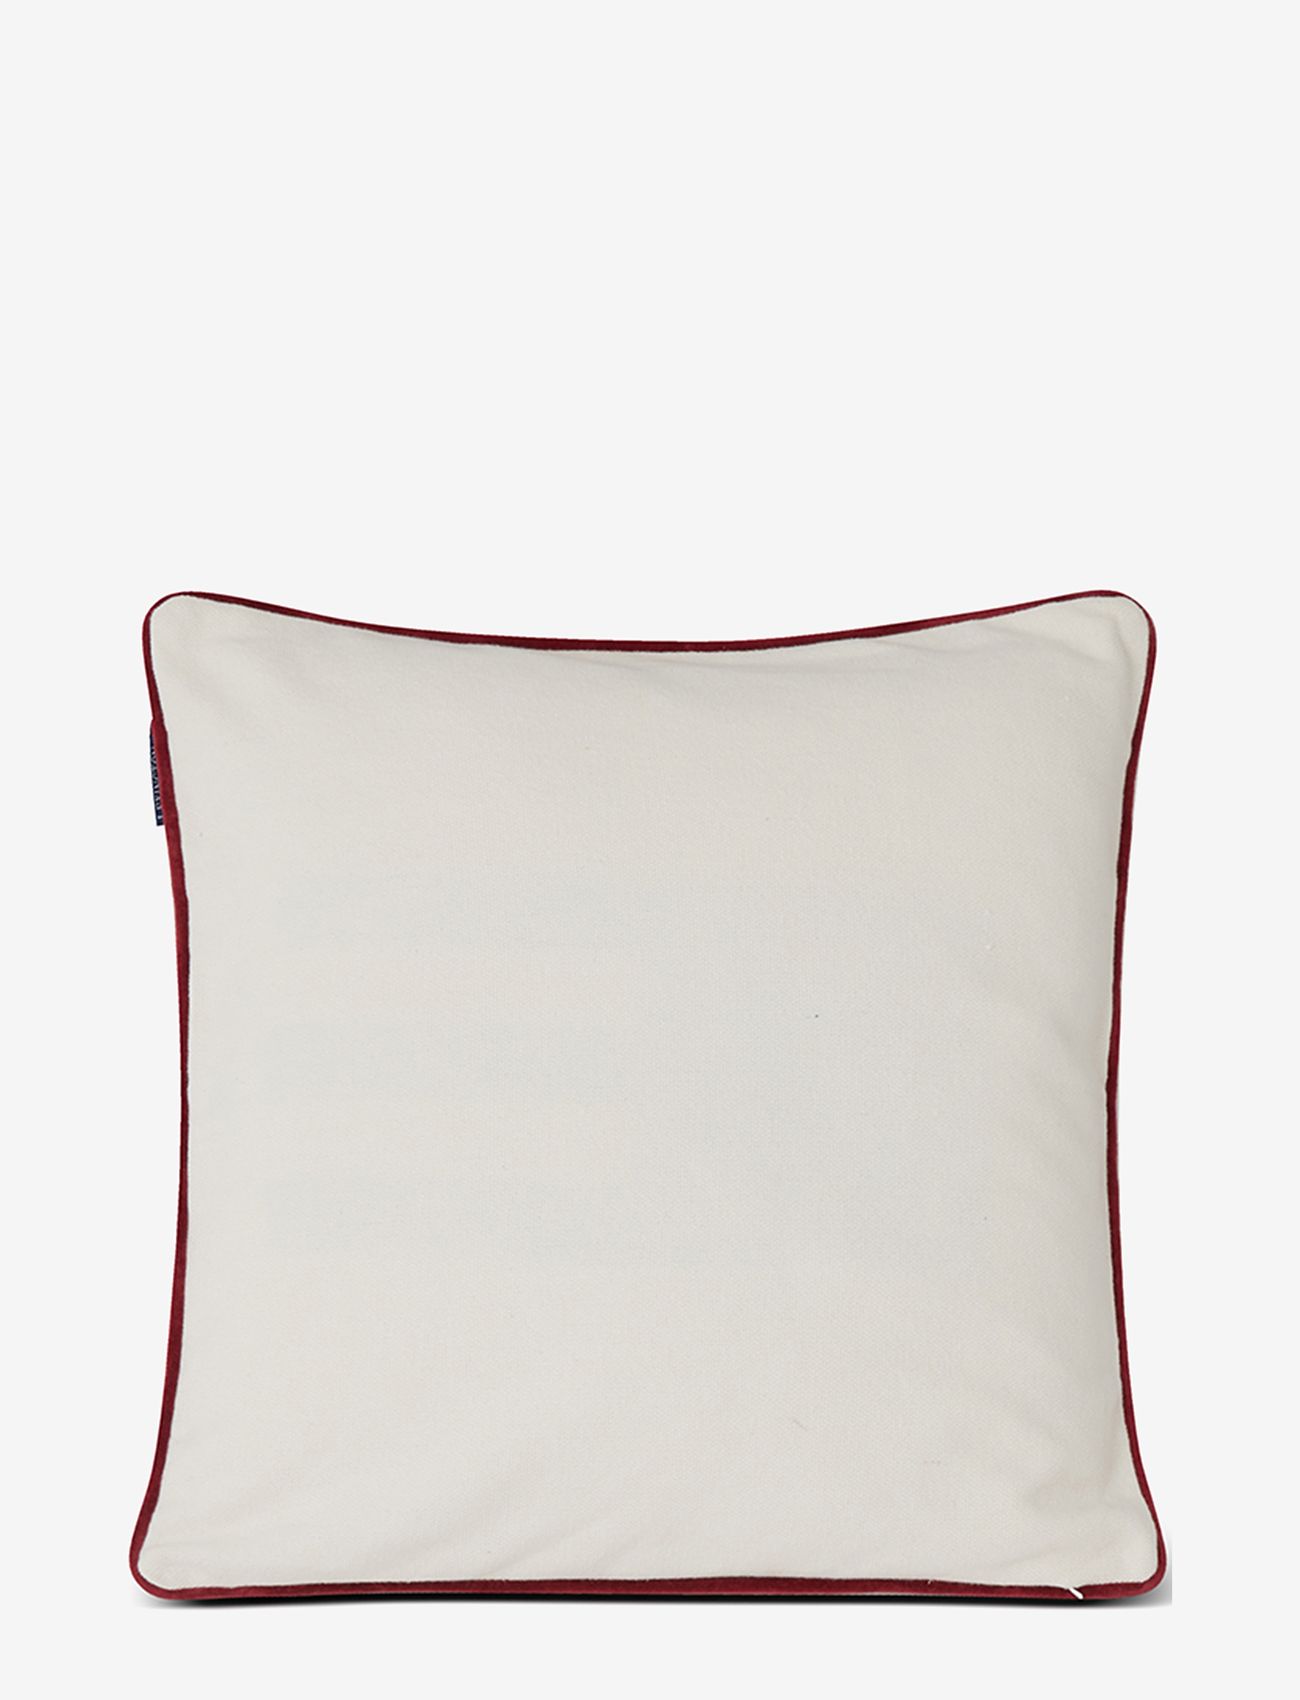 Lexington Home - Seasons Greatings Recycled Cotton Pillow Cover - kussenhoezen - off white/red - 1